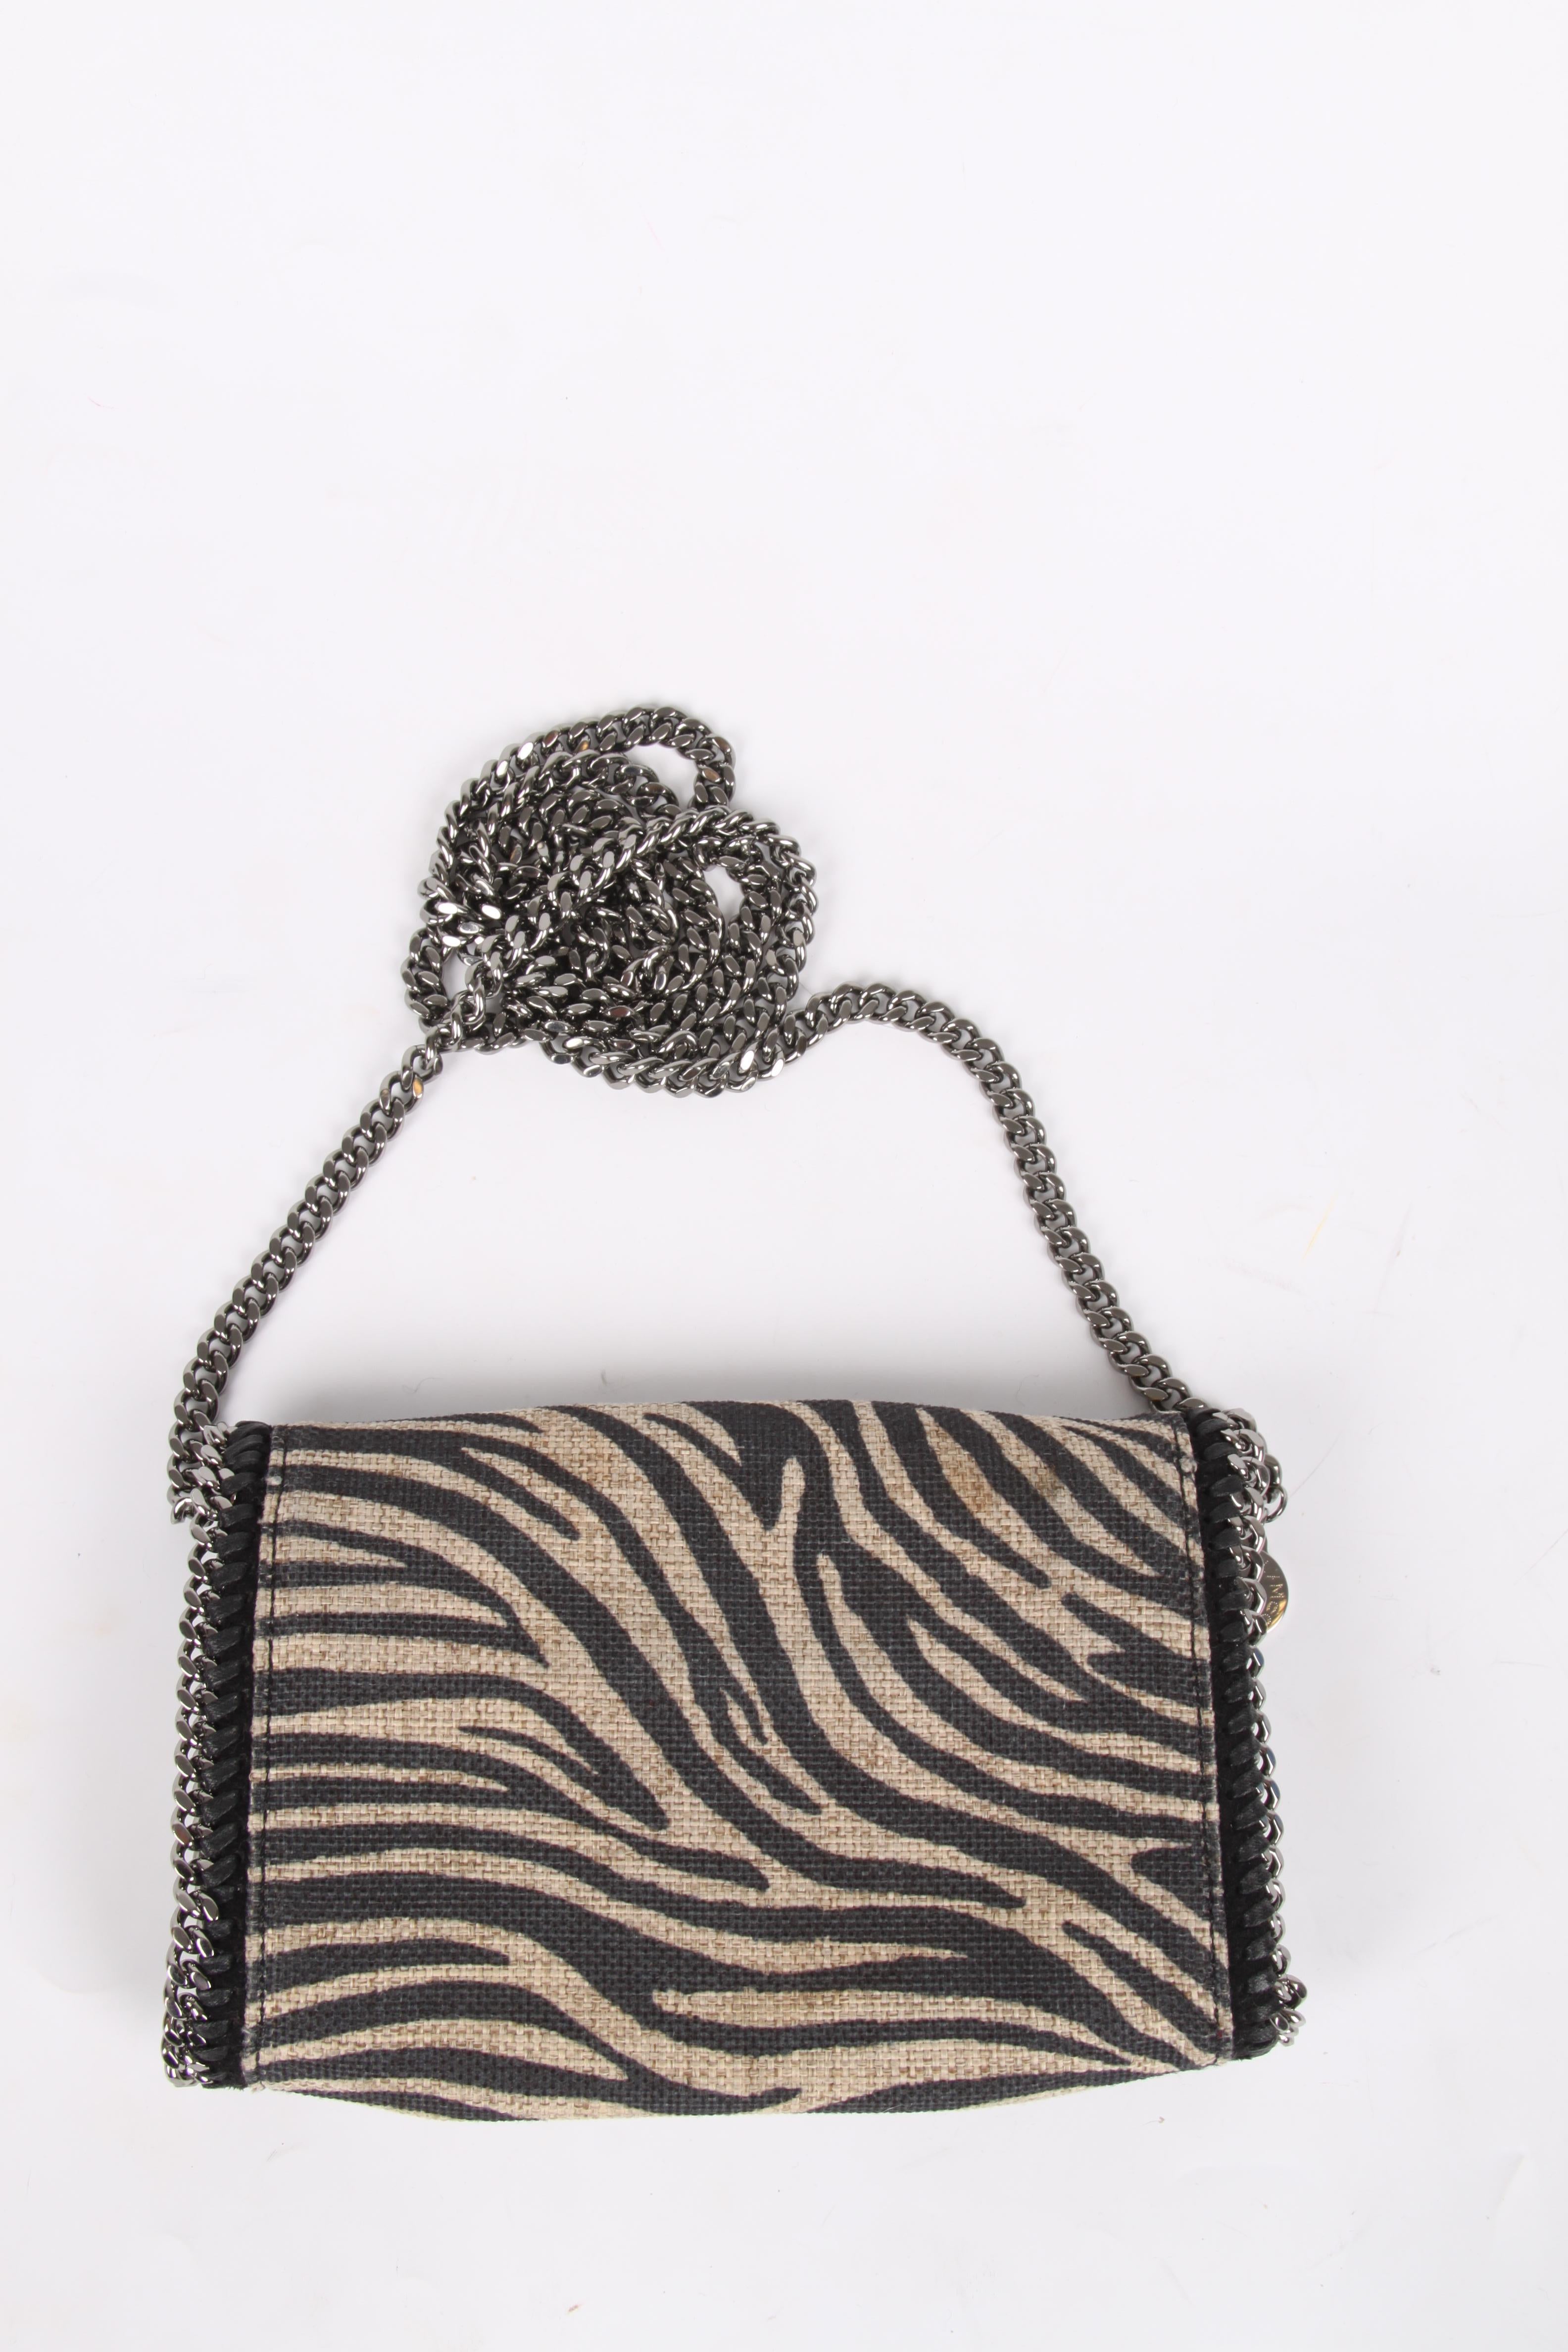 Stella McCartney is known for her use of animal friendly and durable materials. Go Stella!

This Falabella Zebra Shoulder Bag is made of canvas. Supple material executed in a beige color with black zebra stripes and embellished with silver-tone